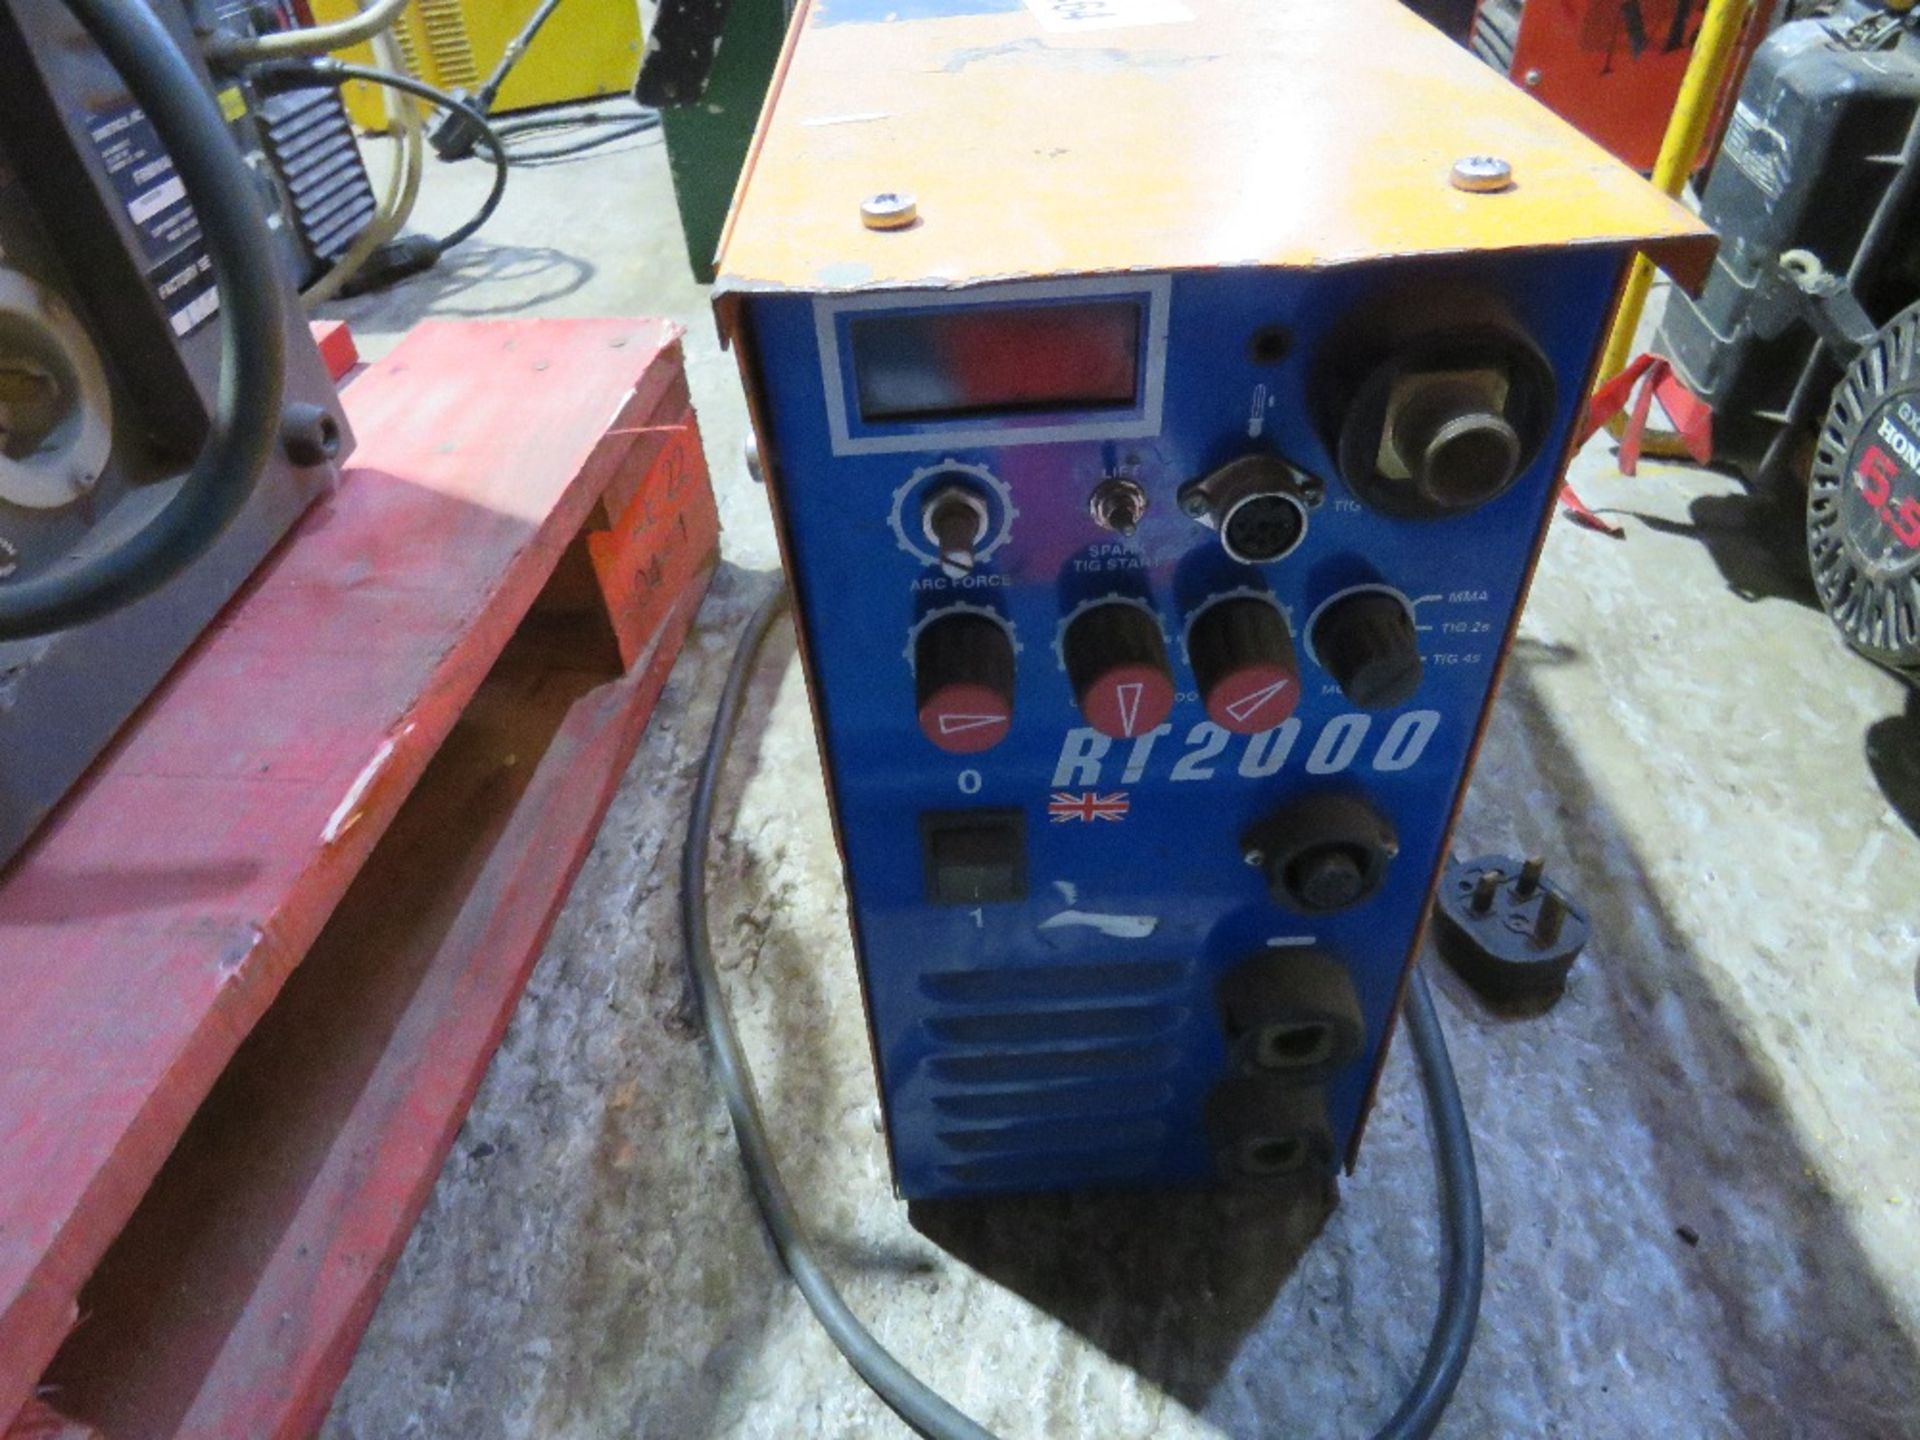 NEWARC RT2000 WELDER. DIRECT FROM LOCAL COMPANY. SURPLUS TO REQUIREMENTS. - Image 2 of 3